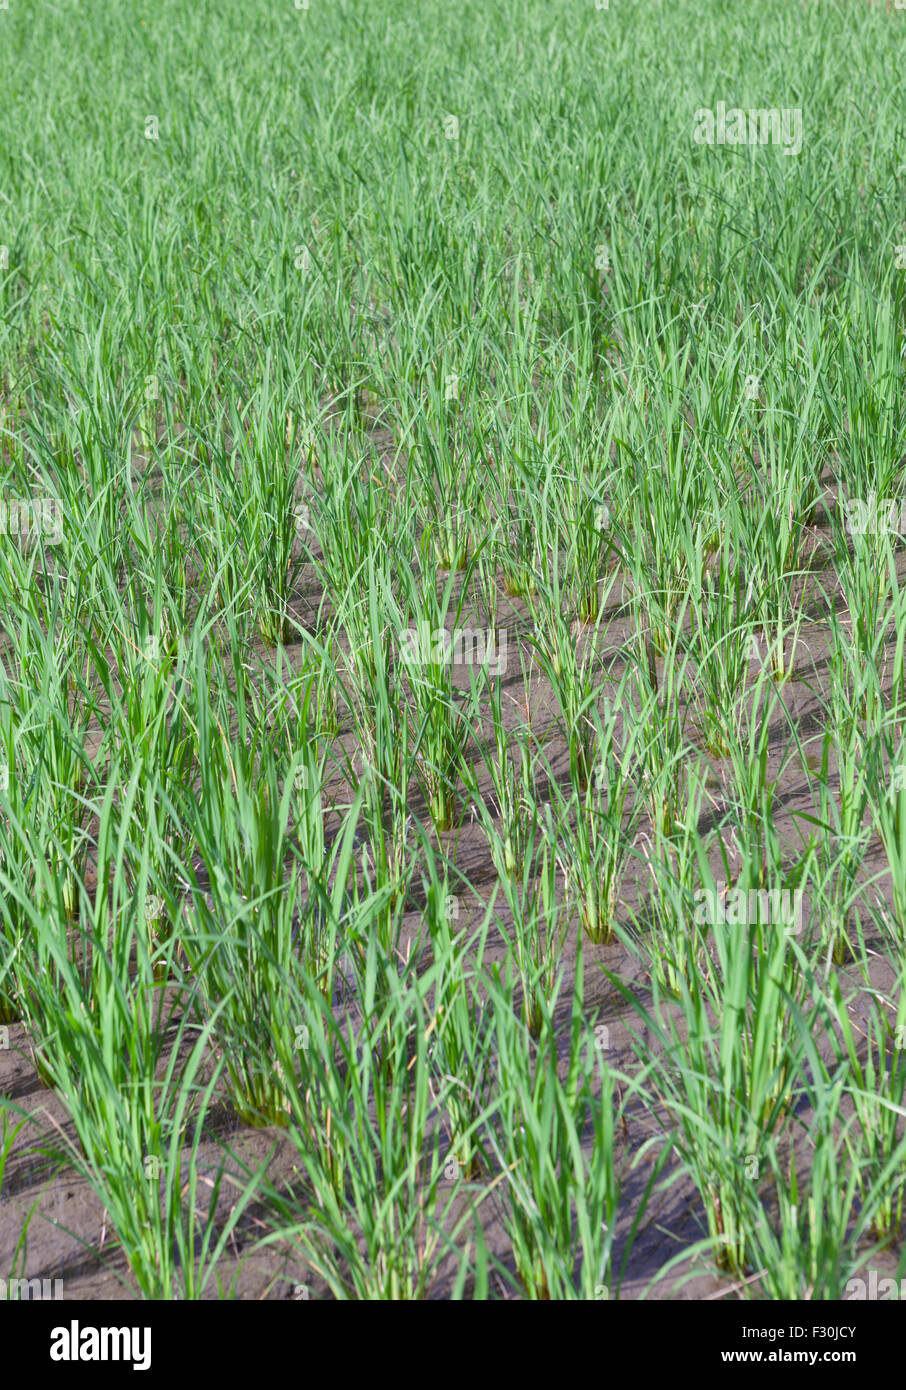 Rice growing in paddy field in Bali, Indonesia Stock Photo